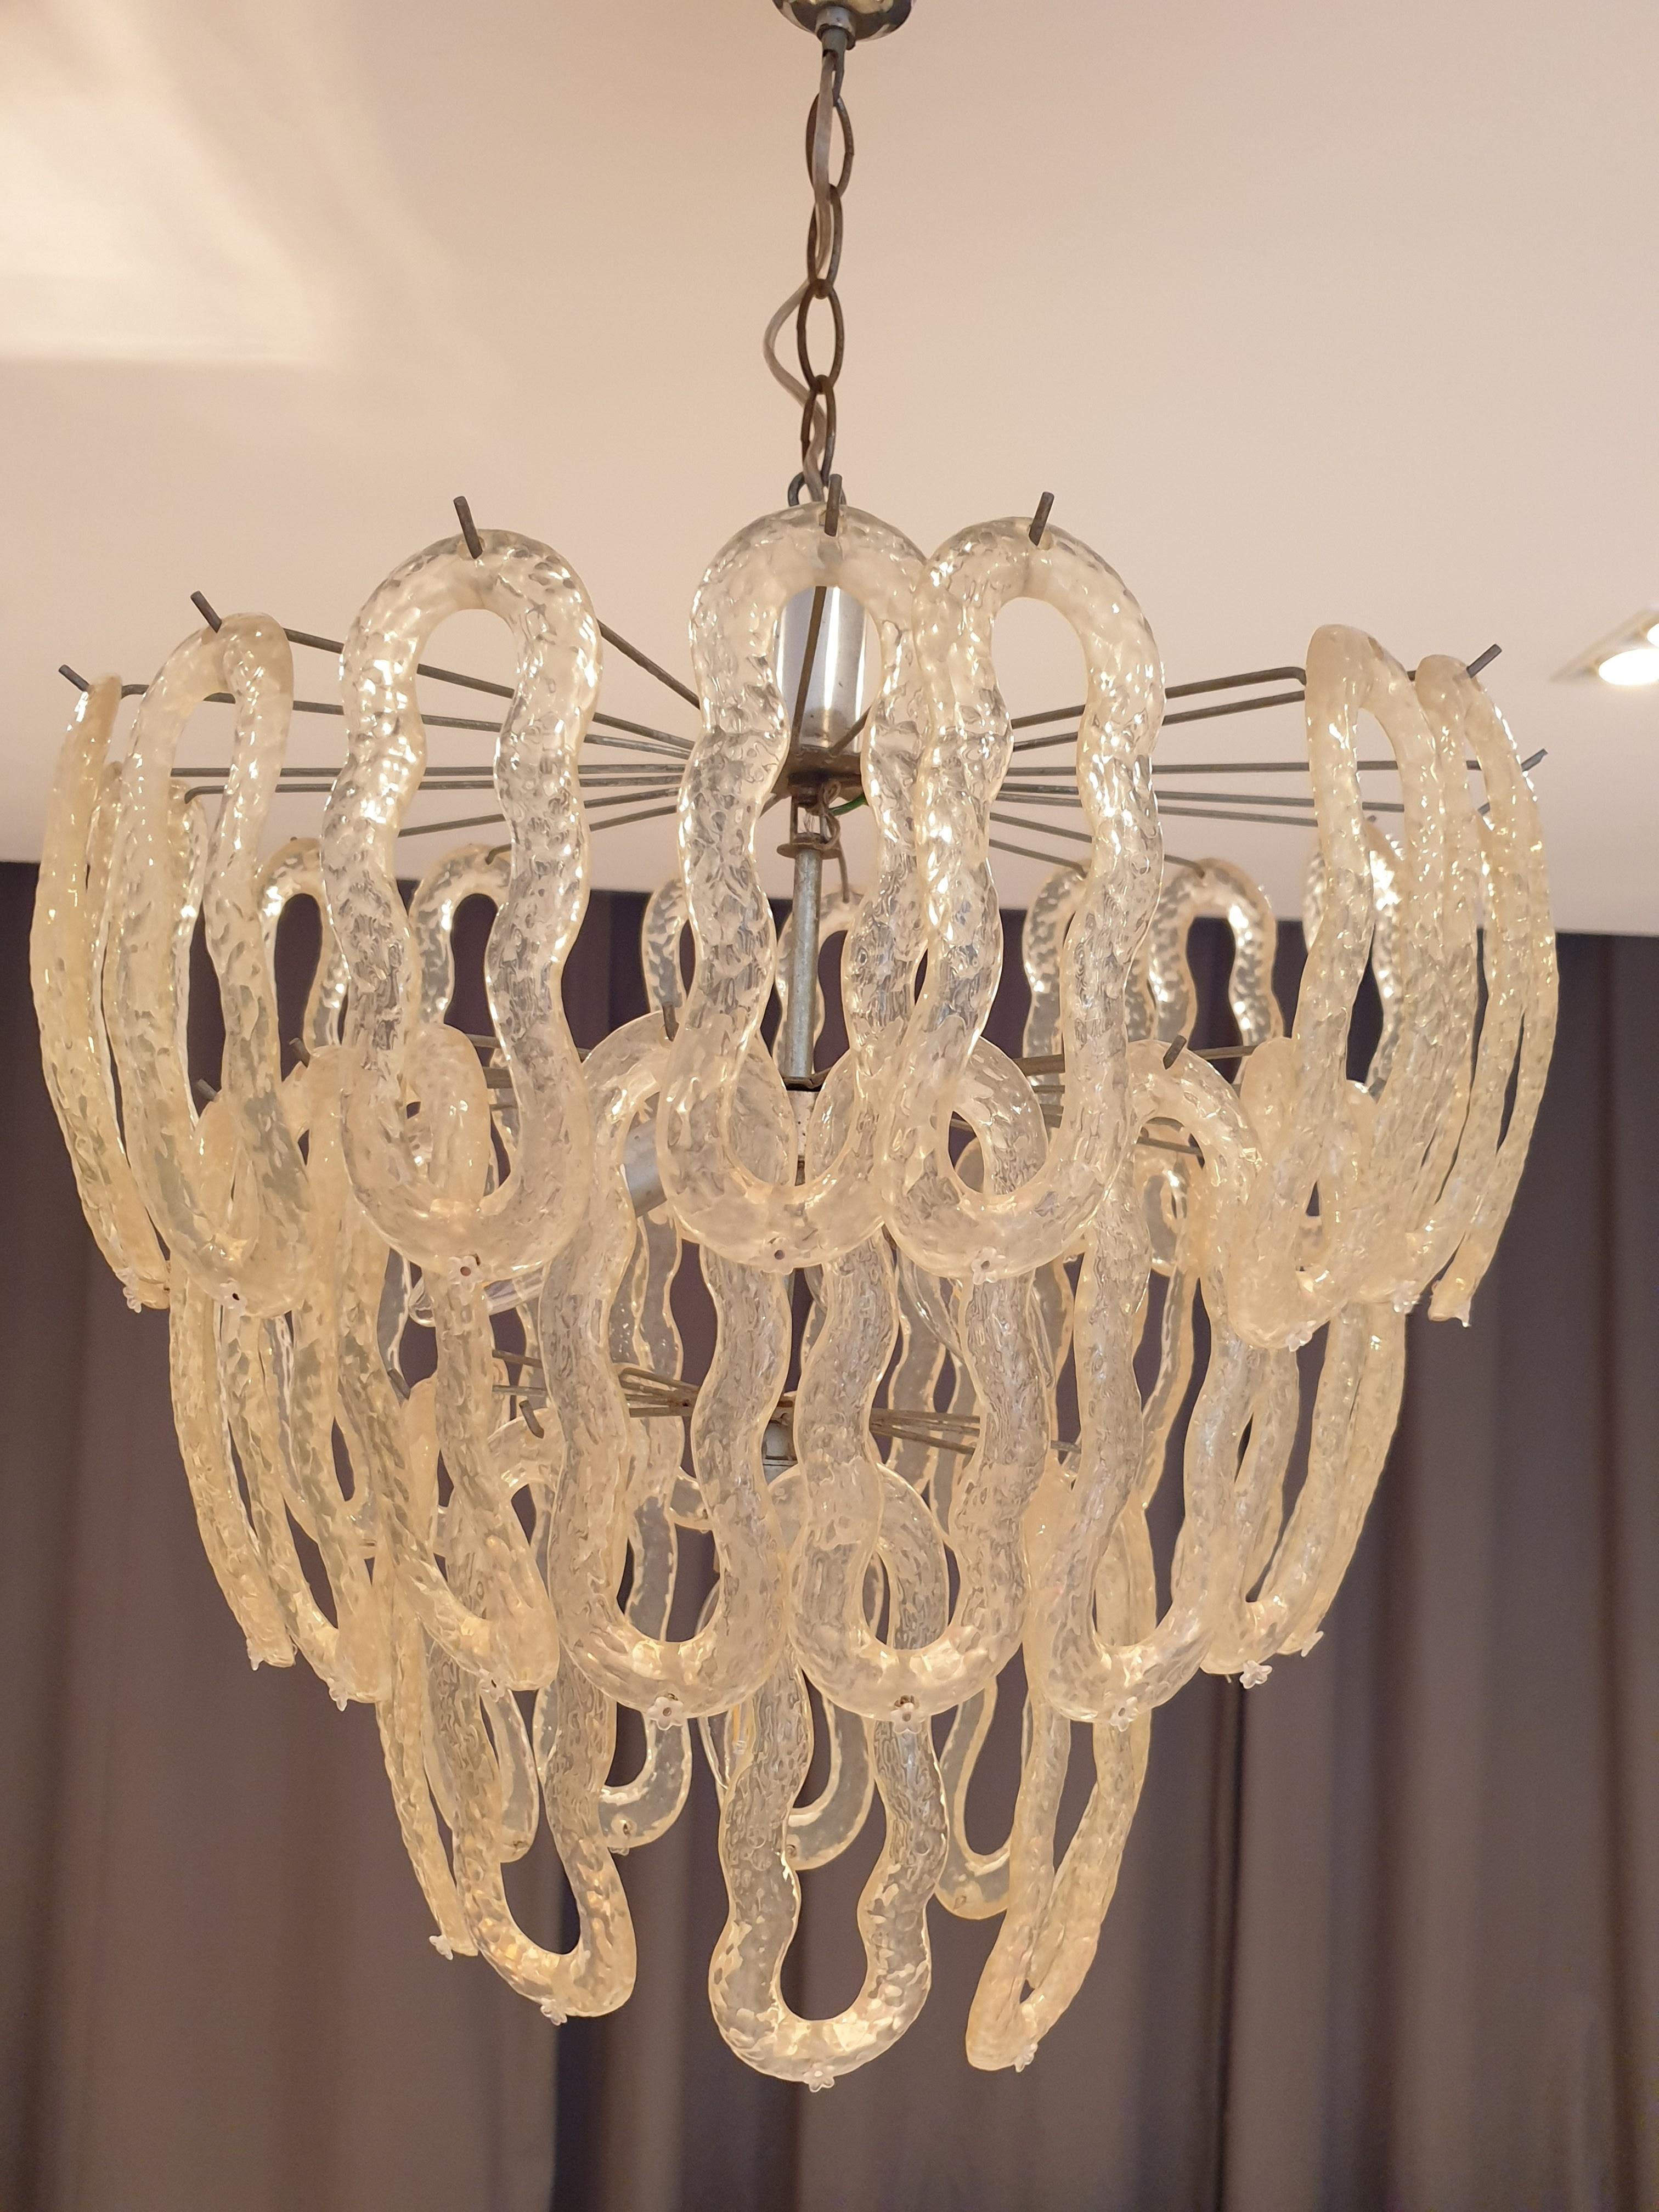 Well sized Mid-Century Modern chrome and acrylic chandelier with 7 lamp holders. The acrylic leaves are surrmounted by a small decorative acrylic flower on the ends.